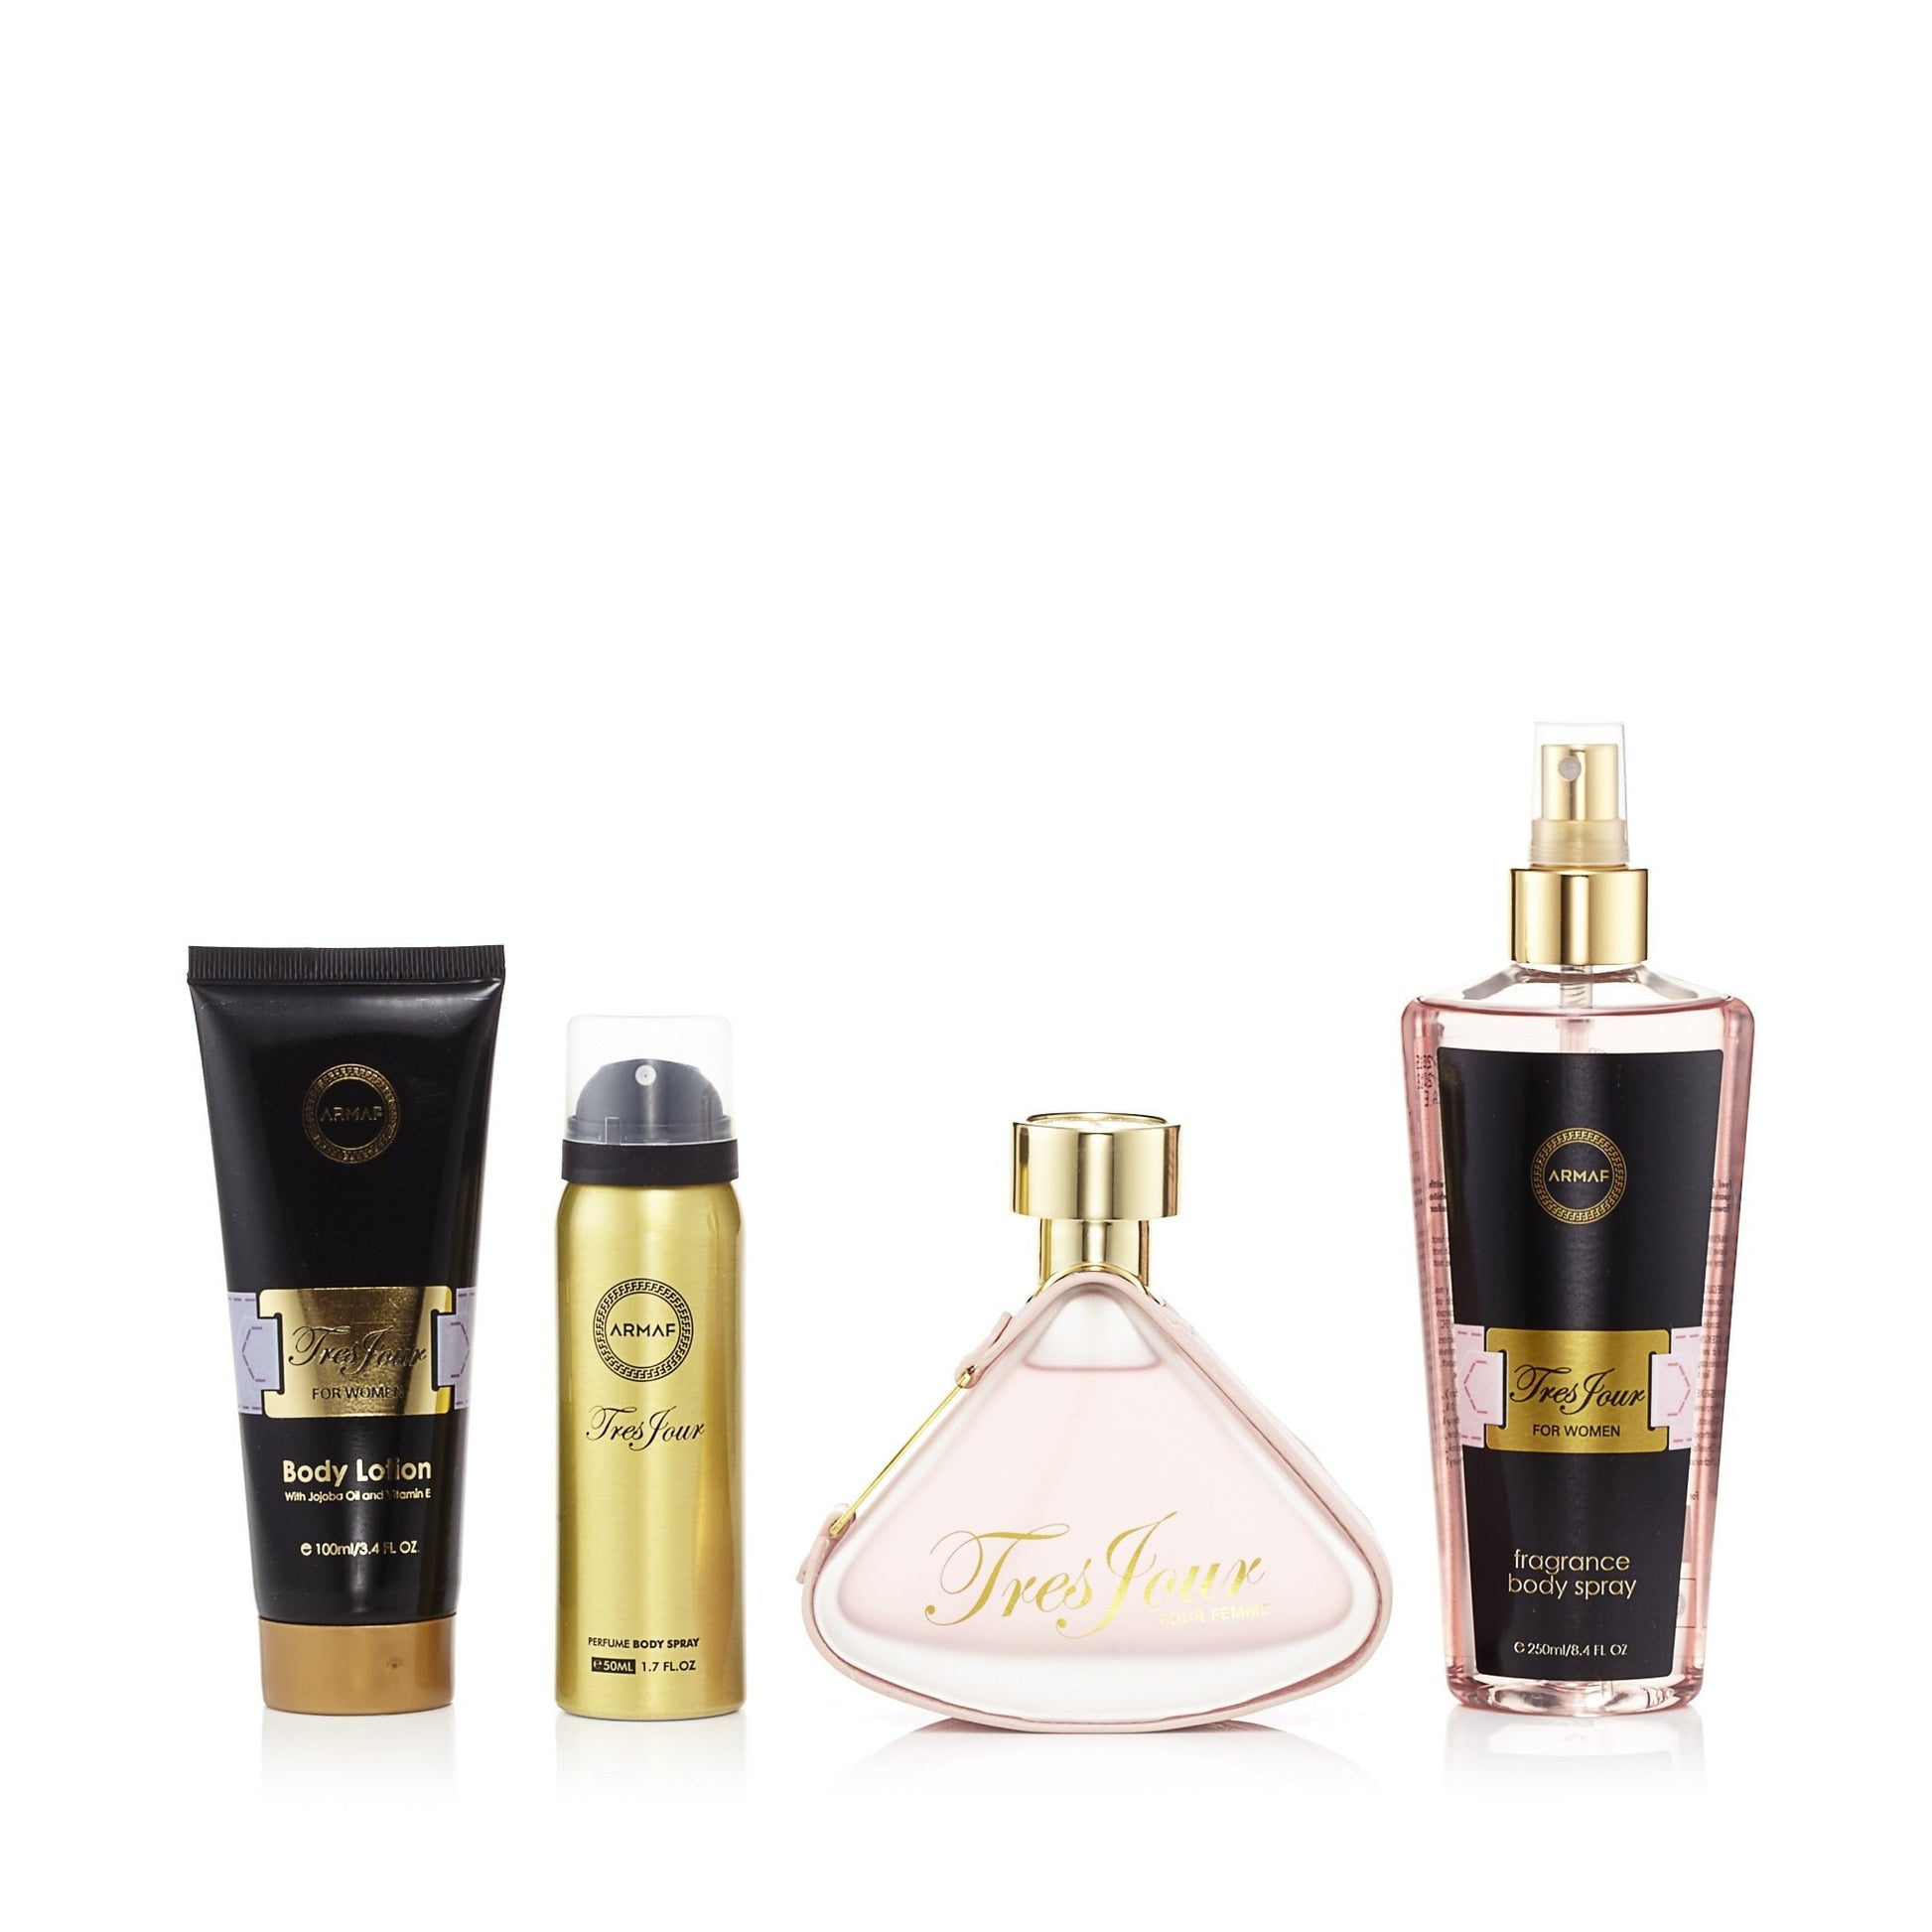 Tres Jour Gift Set Womens  1.7 oz. Click to open in modal